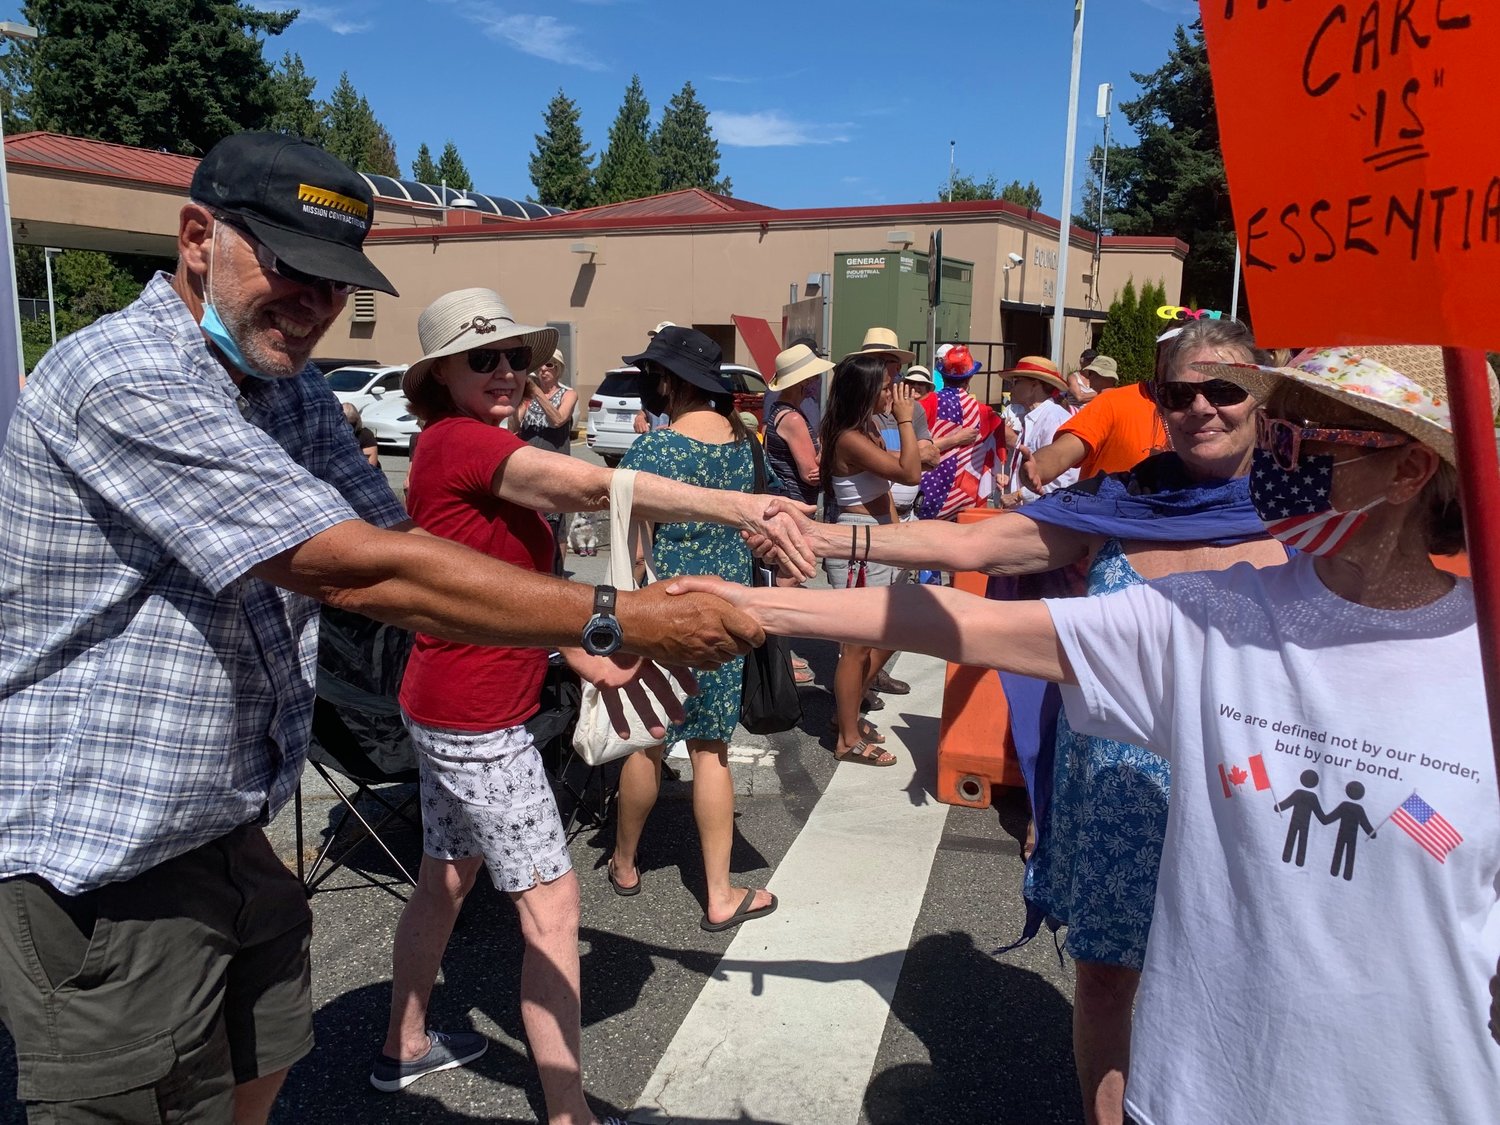 Point Roberts residents and Canadians hold hands across the border at the Boundary Bay border crossing. Demonstrators gathered at the border crossing July 4 to protest against the continued closure of the U.S./Canada border.